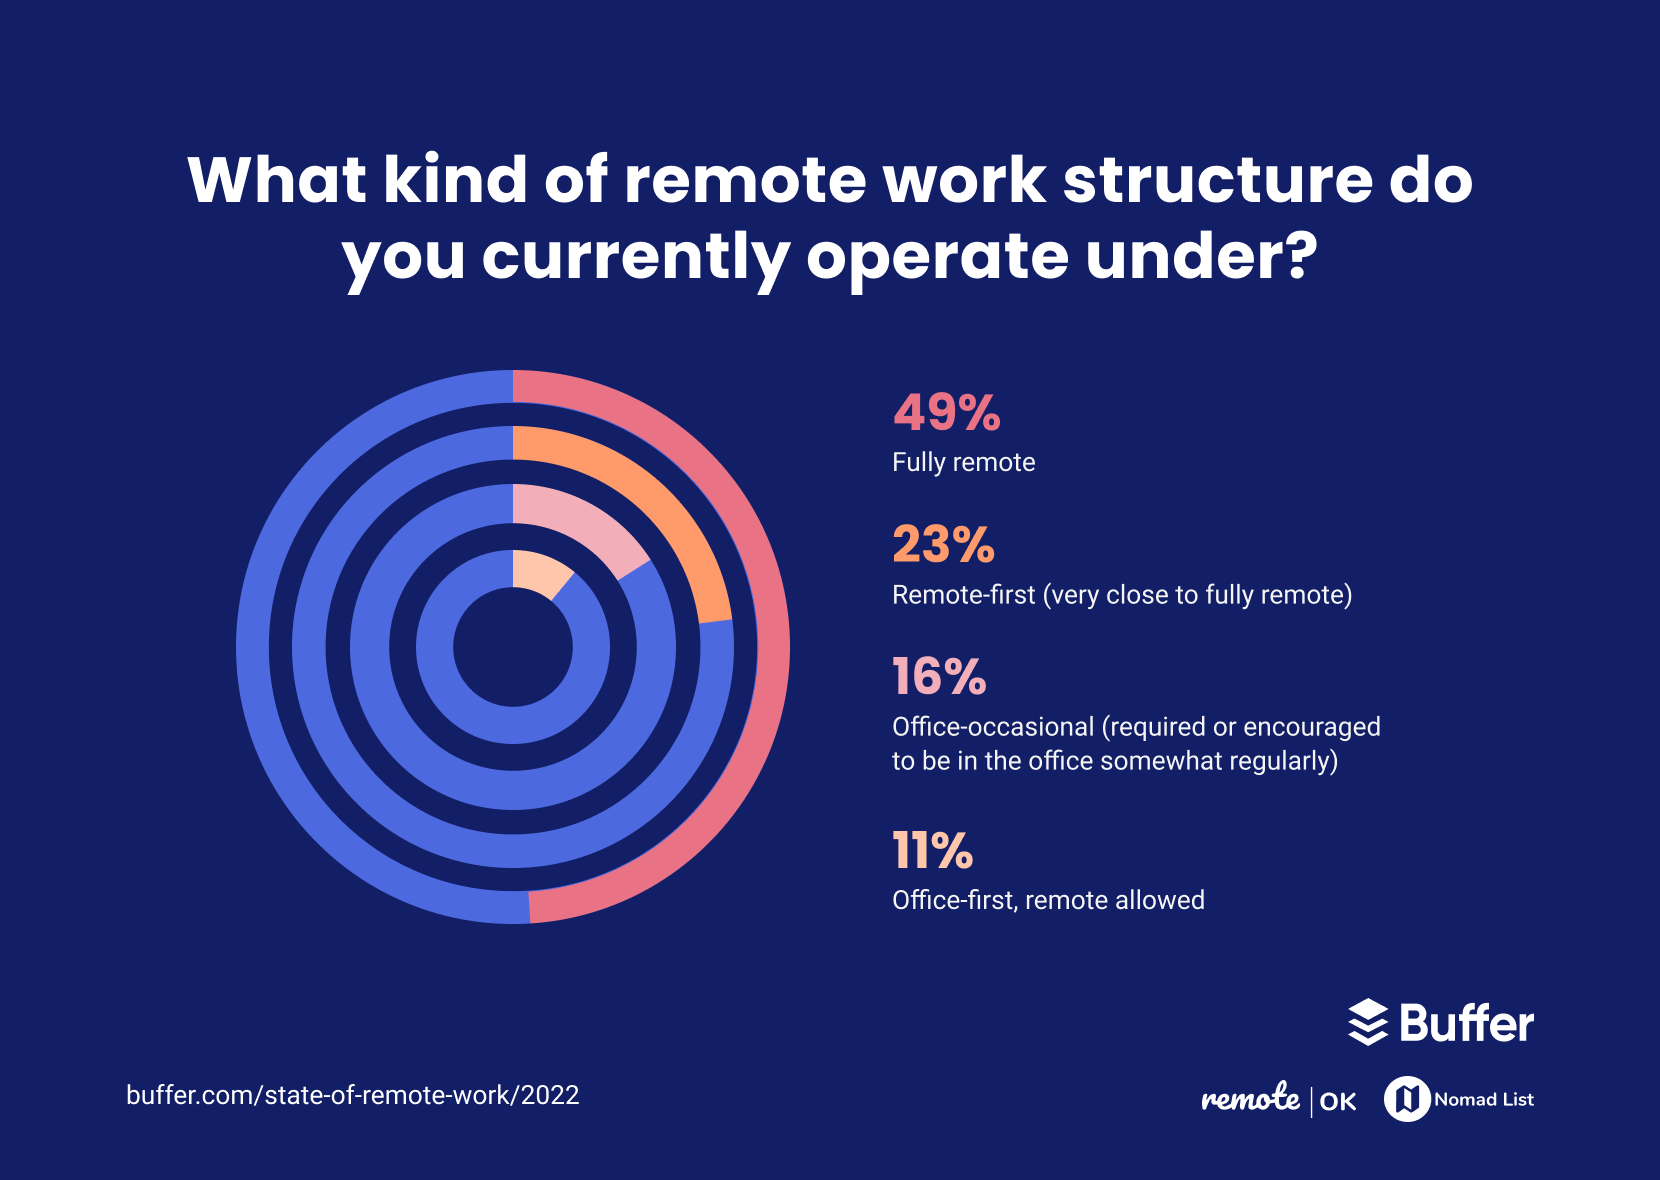 What kind of remote work structure do you currently operate under?